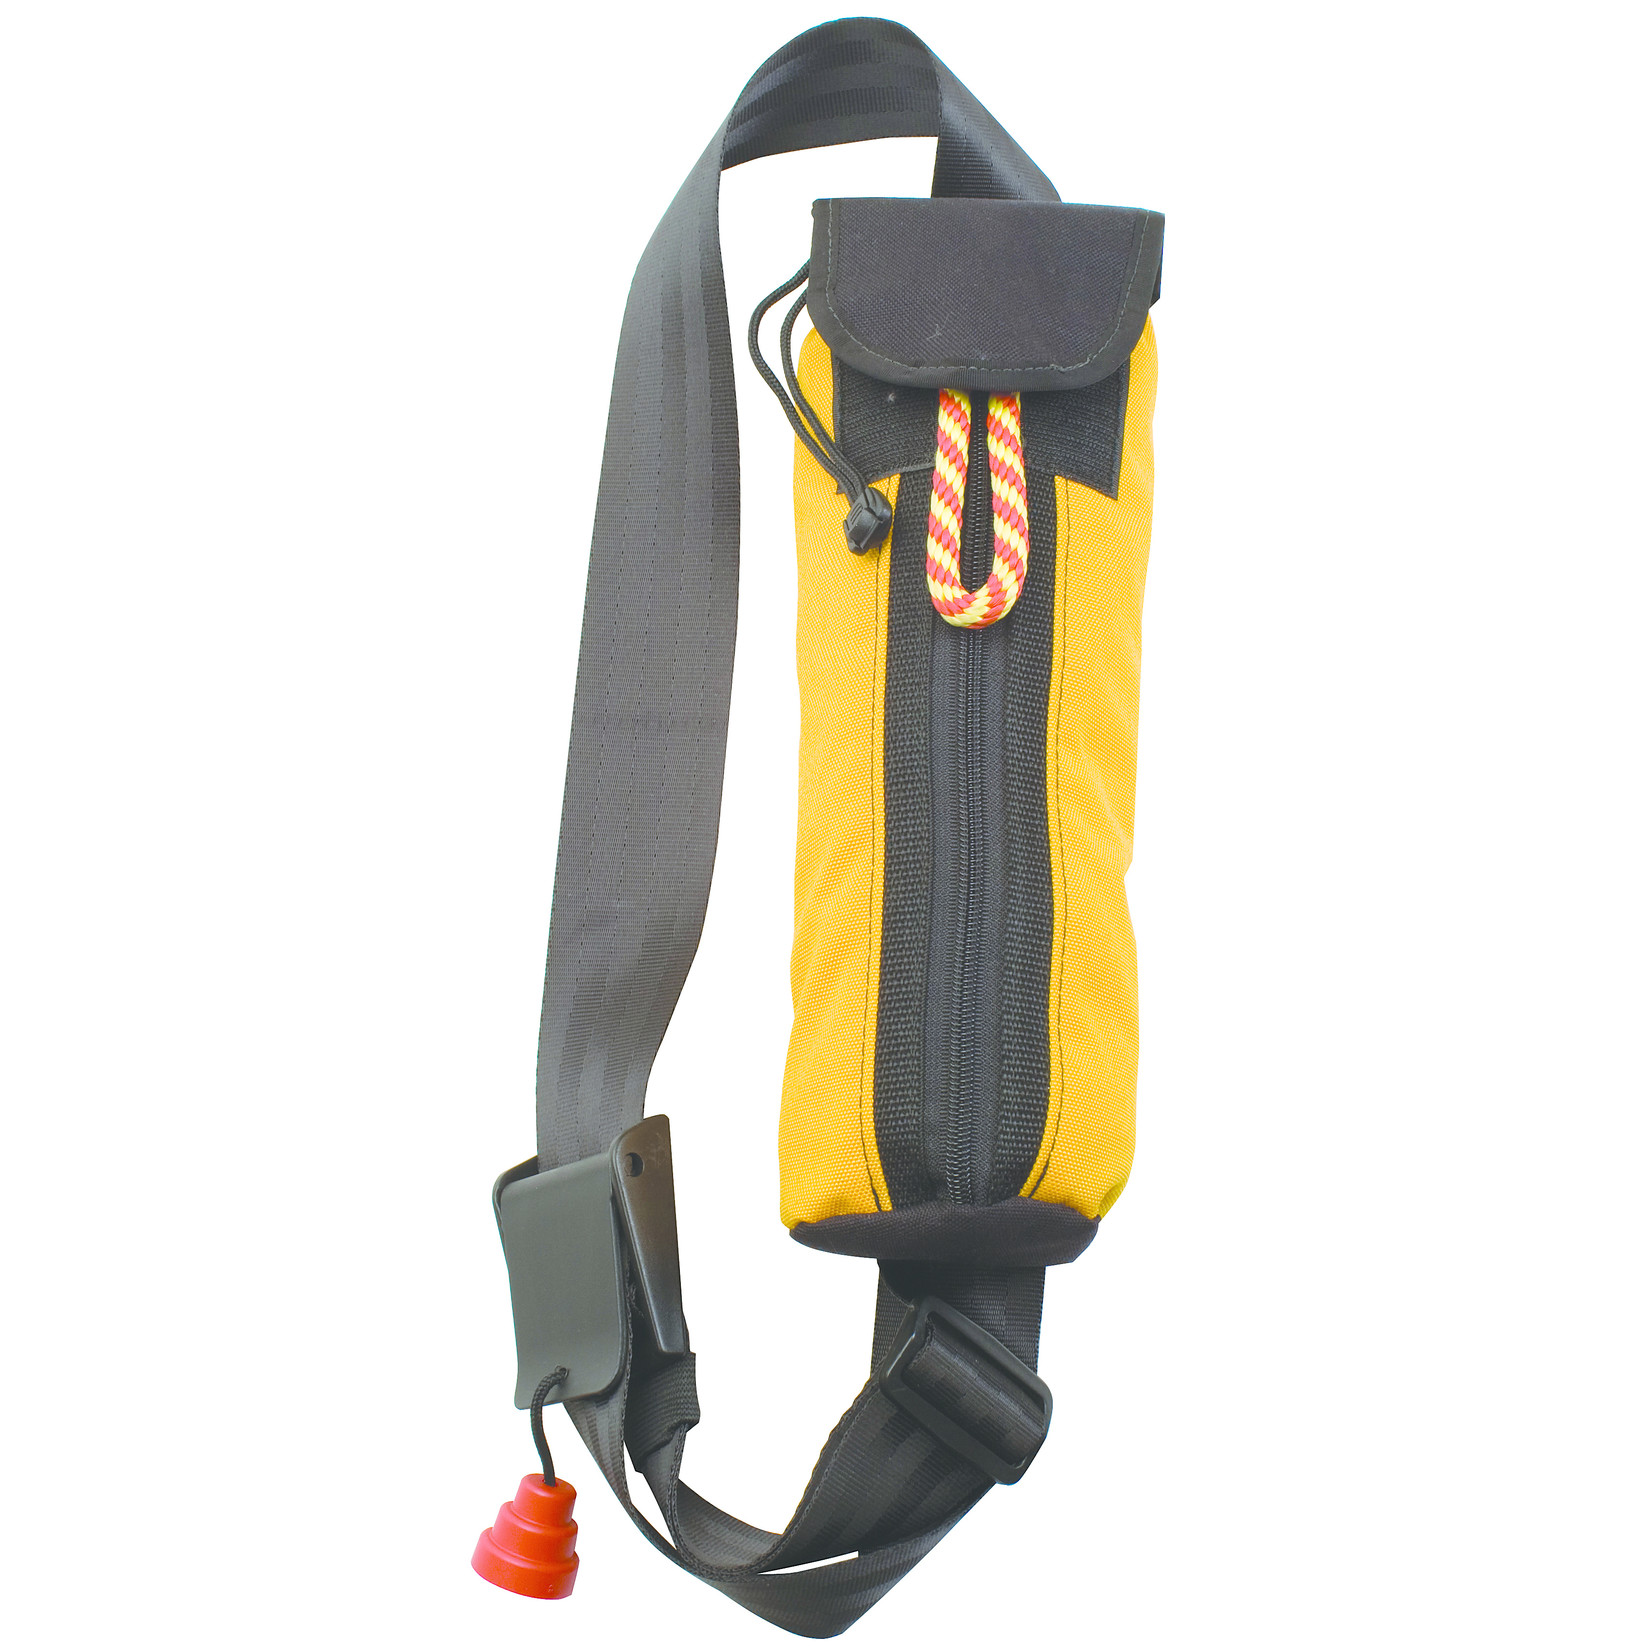 Whitewater Designs Waist Mounted Rescue Holster & Bag